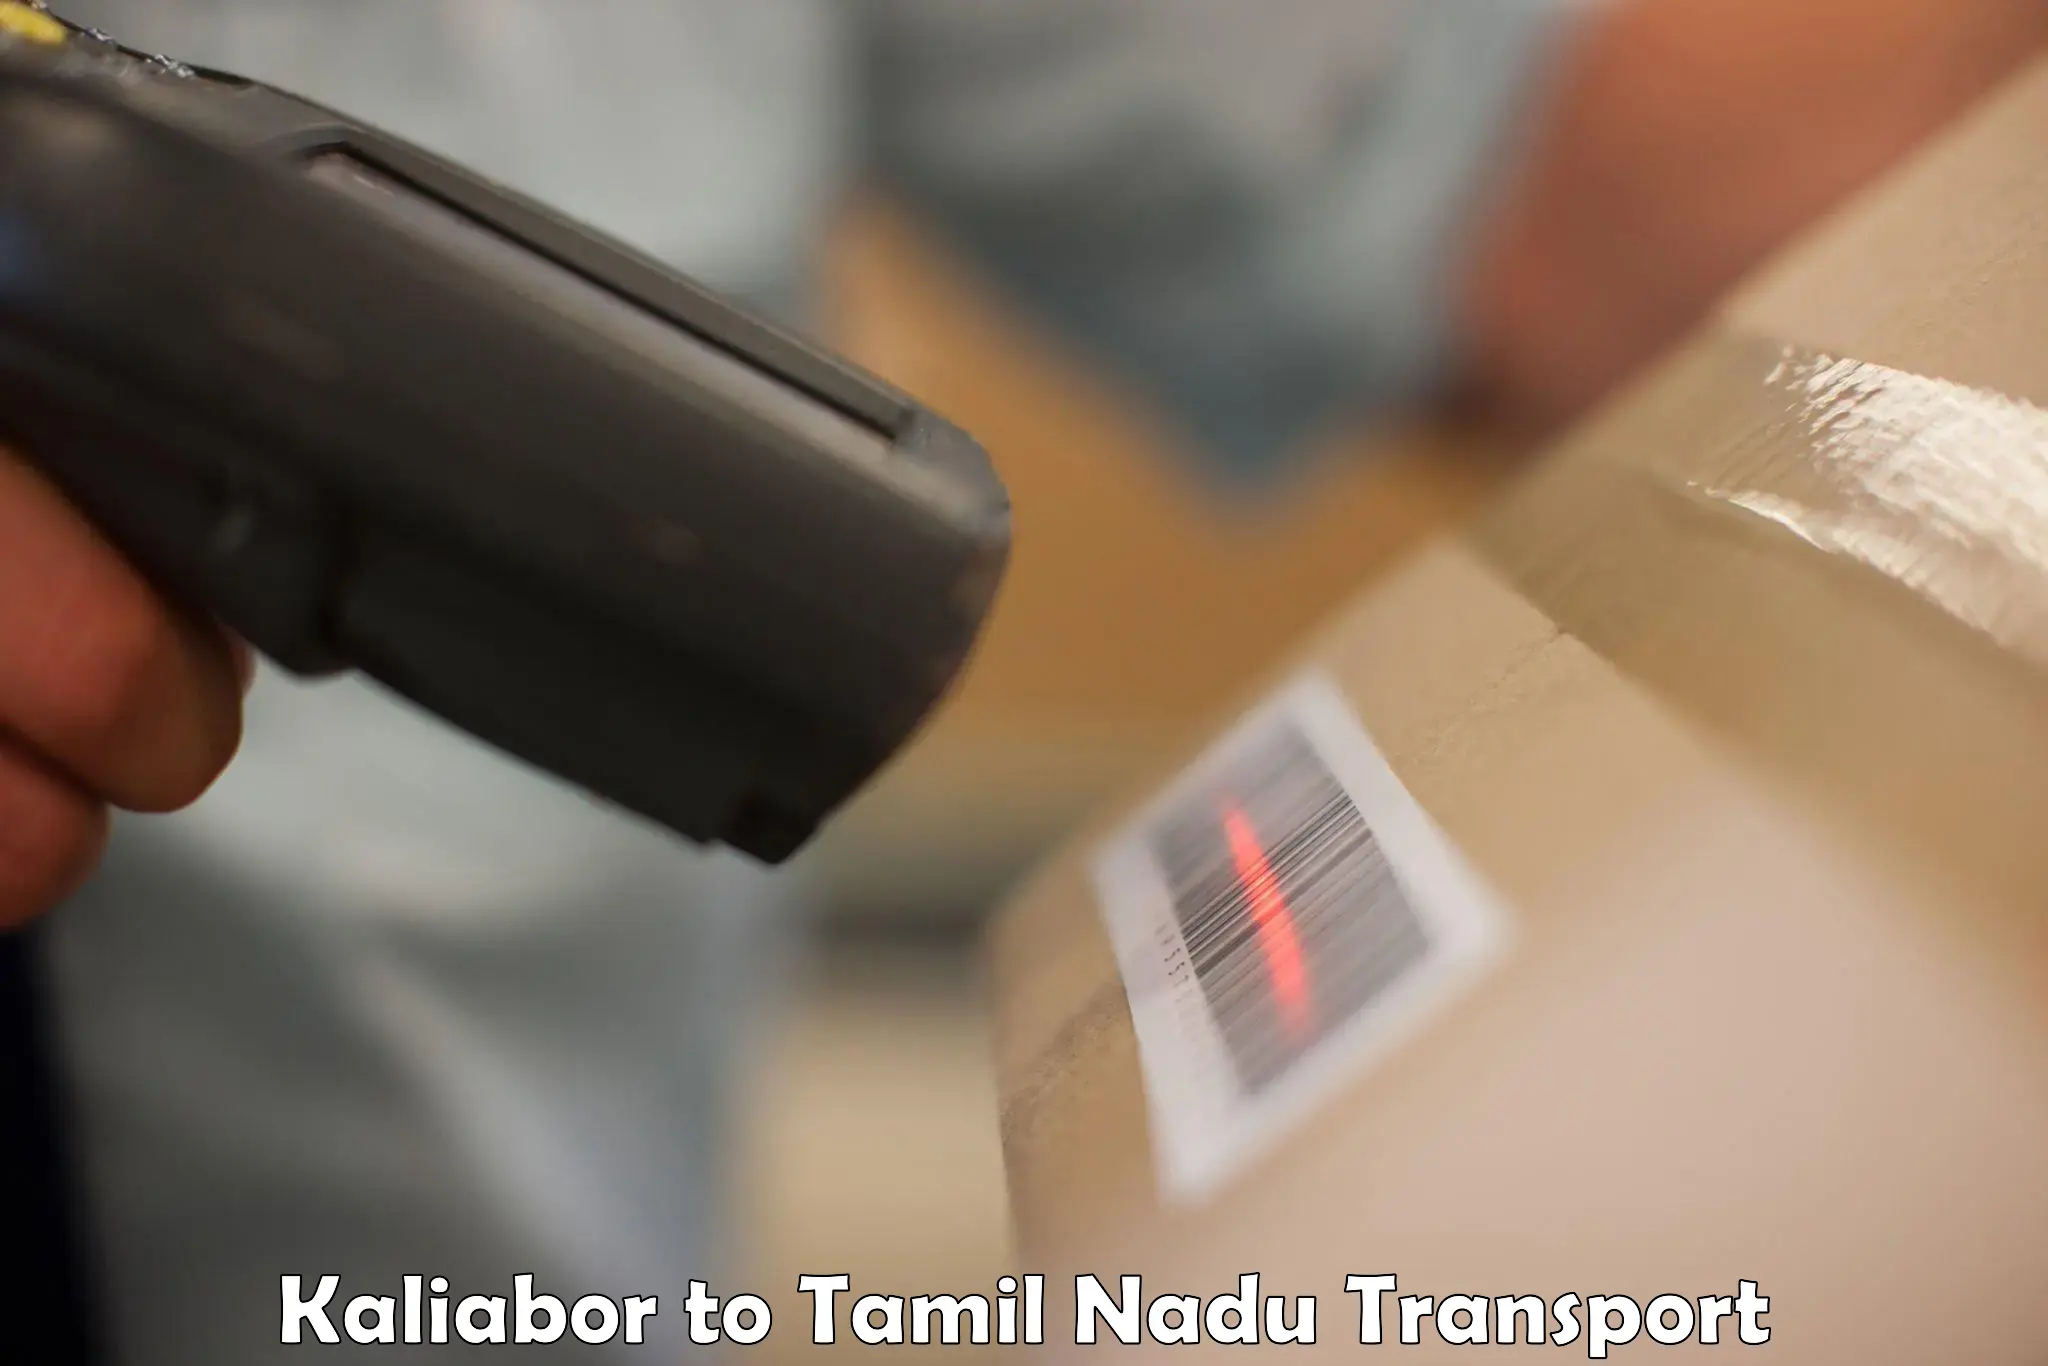 Cargo transport services Kaliabor to Vellore Institute of Technology